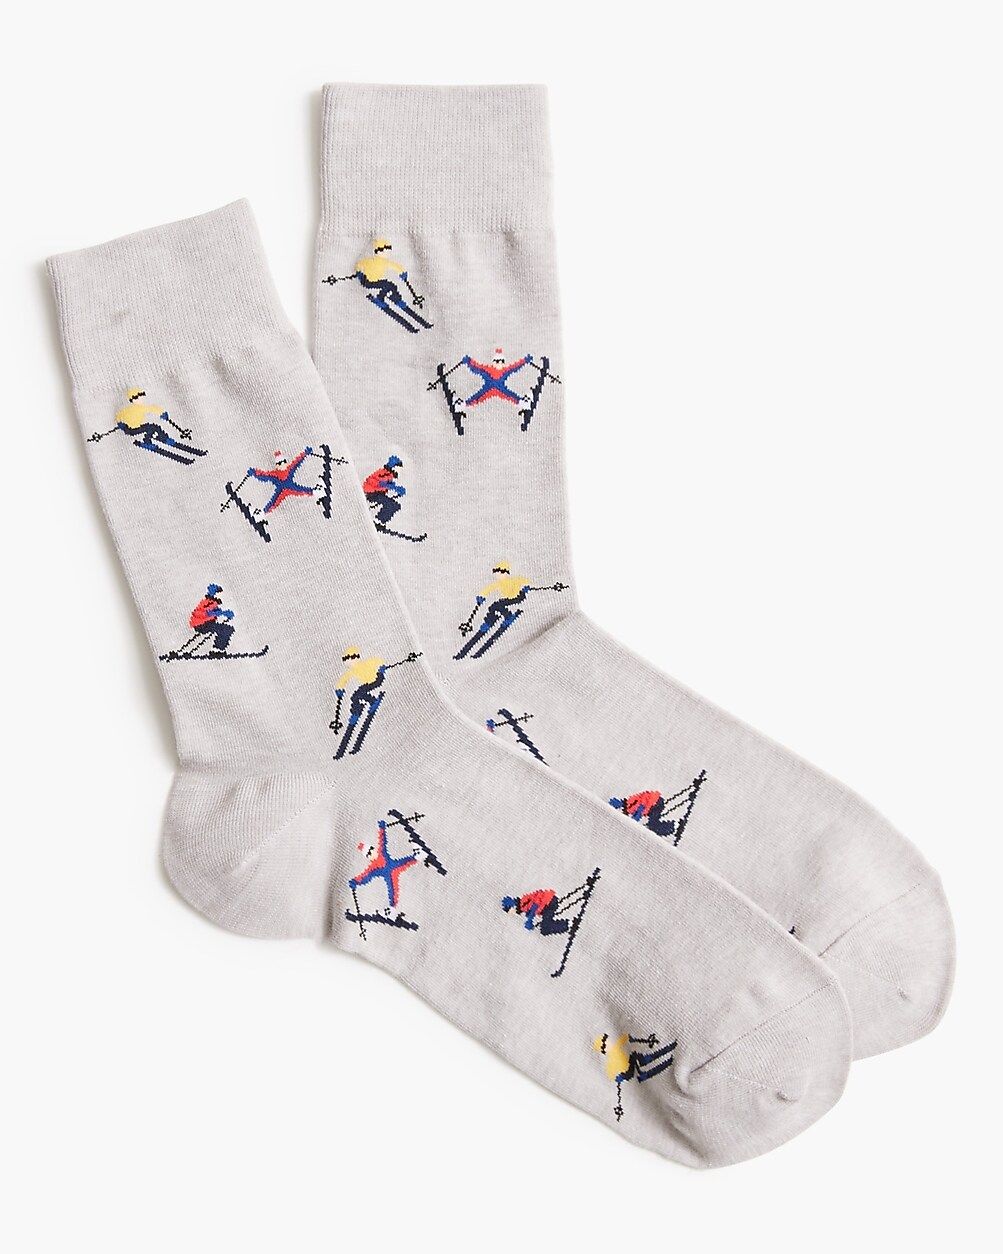 How to wear ittop rated4.8(11 REVIEWS)Skiing socks 1284 people looked at this item in the last da... | J.Crew Factory